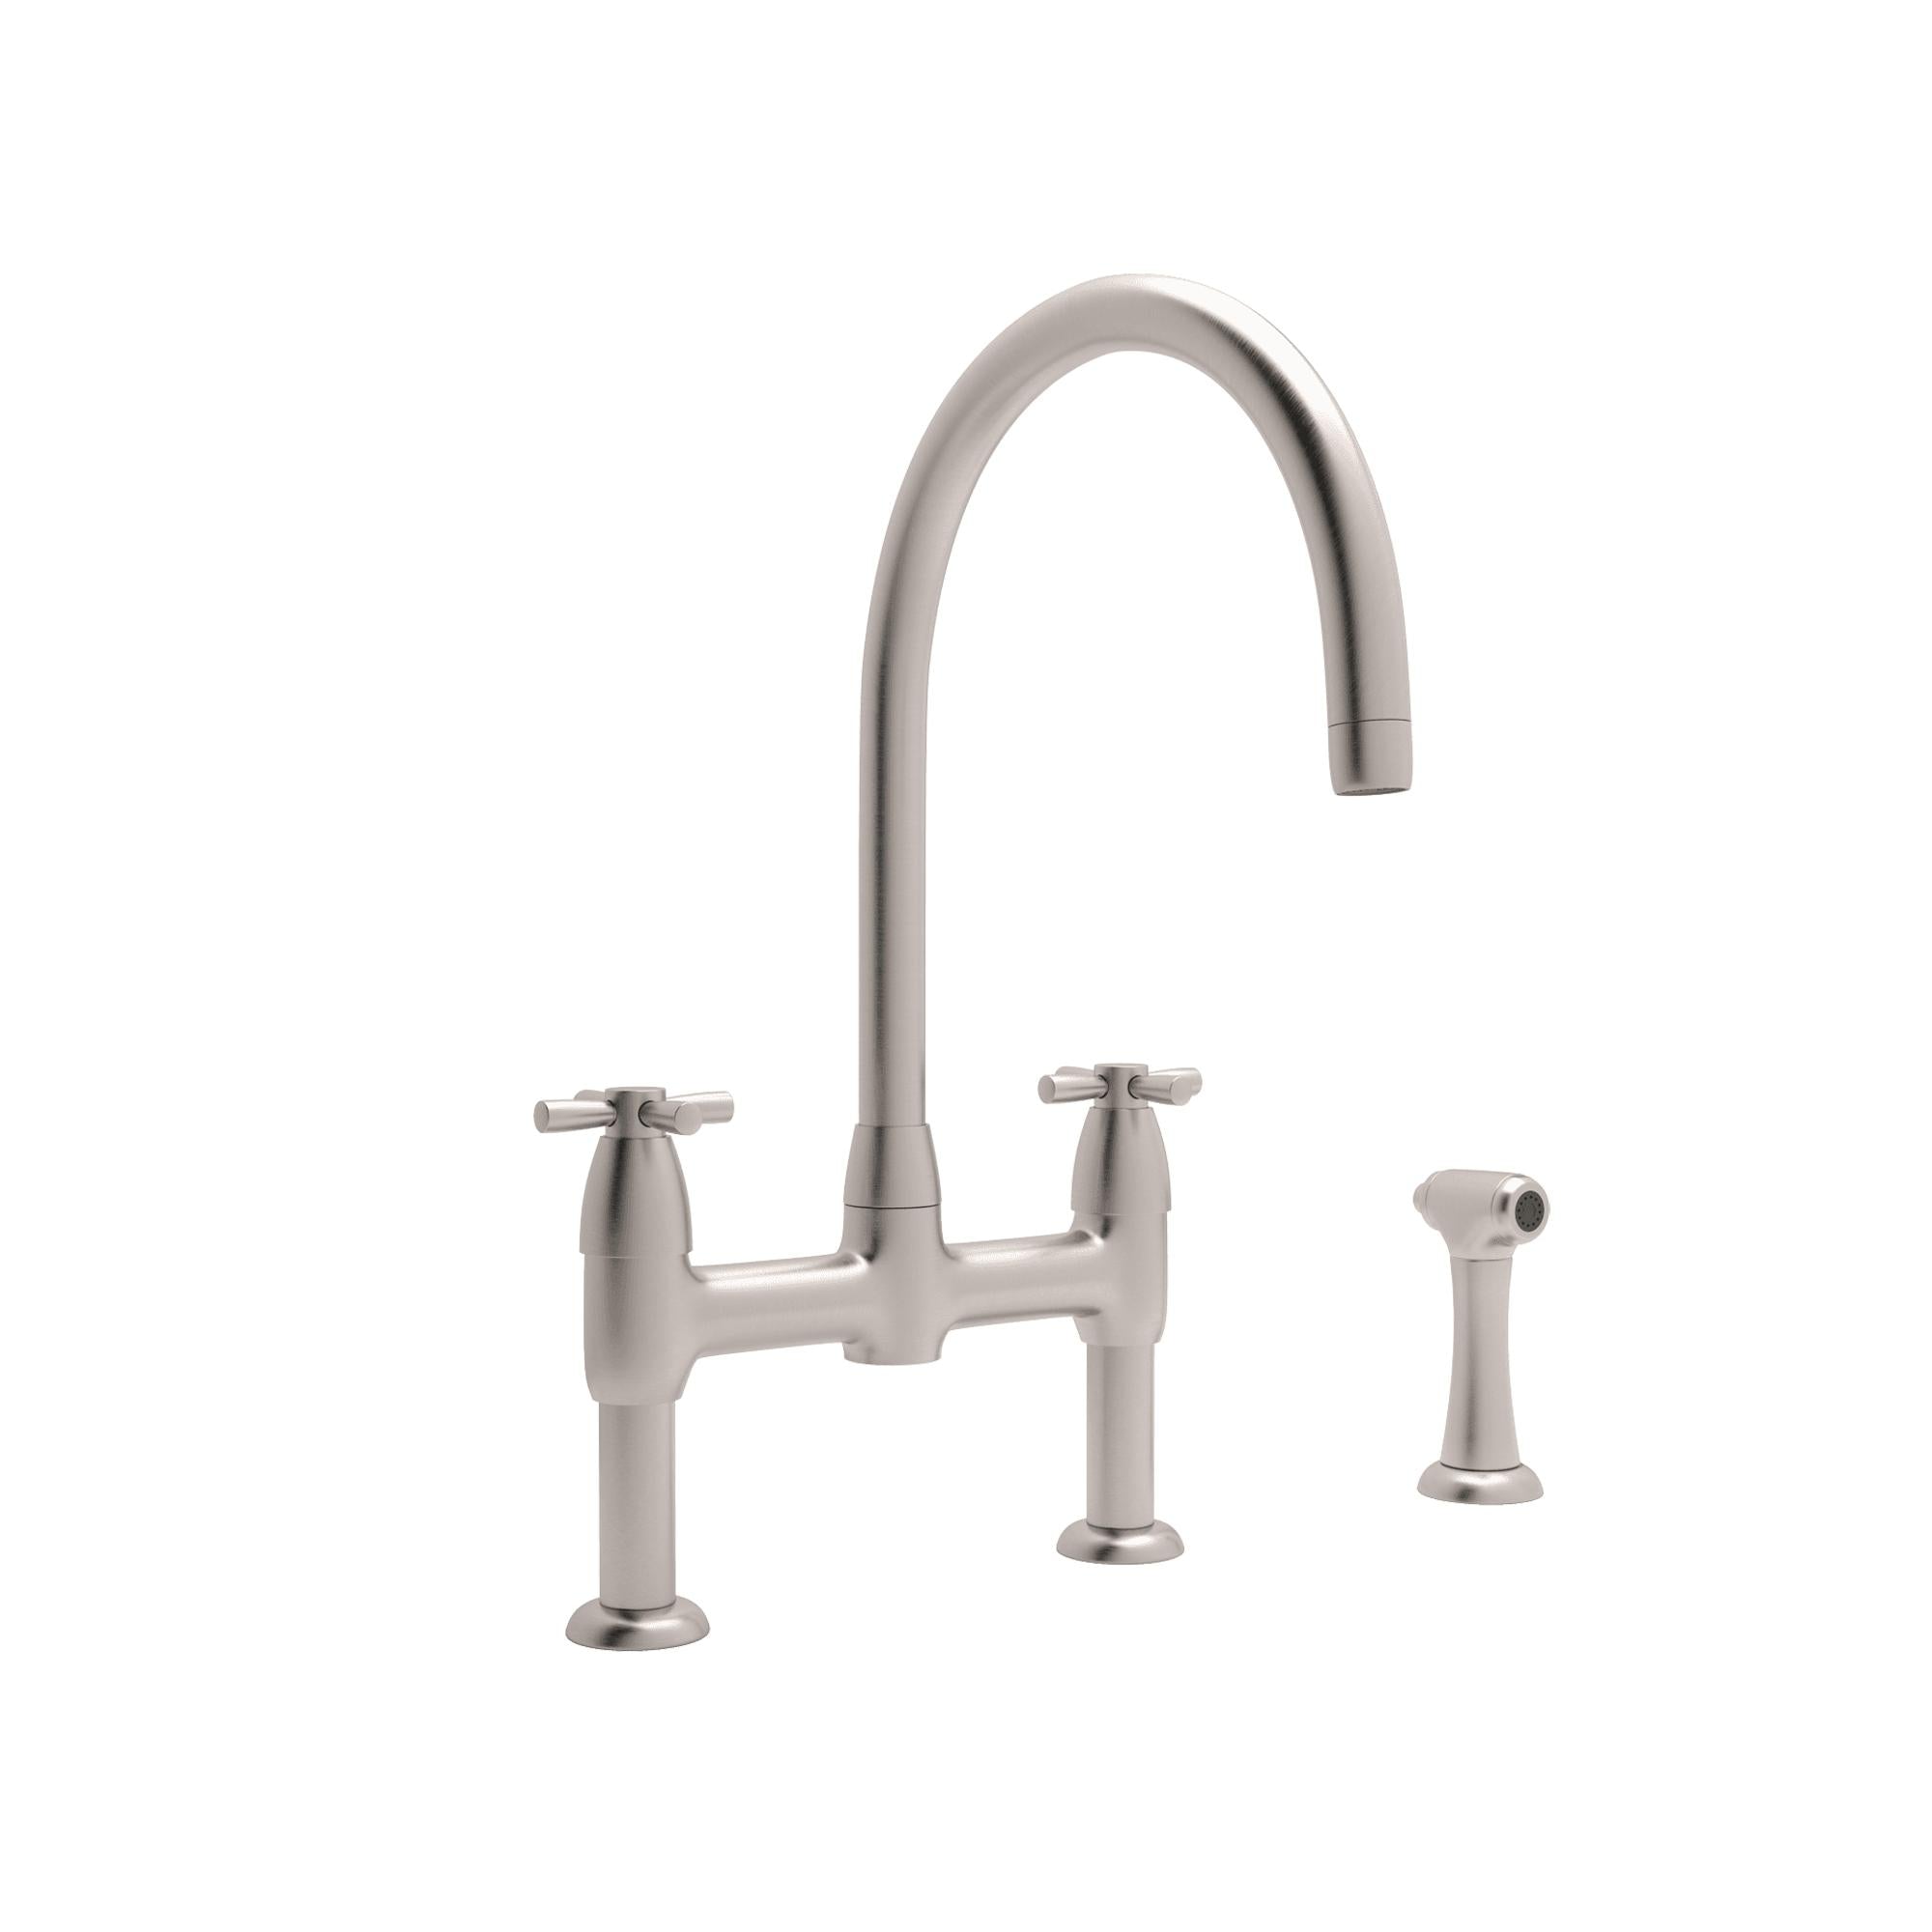 Perrin & Rowe U.4272 Holborn Bridge Kitchen Faucet with C-Spout and Side Spray